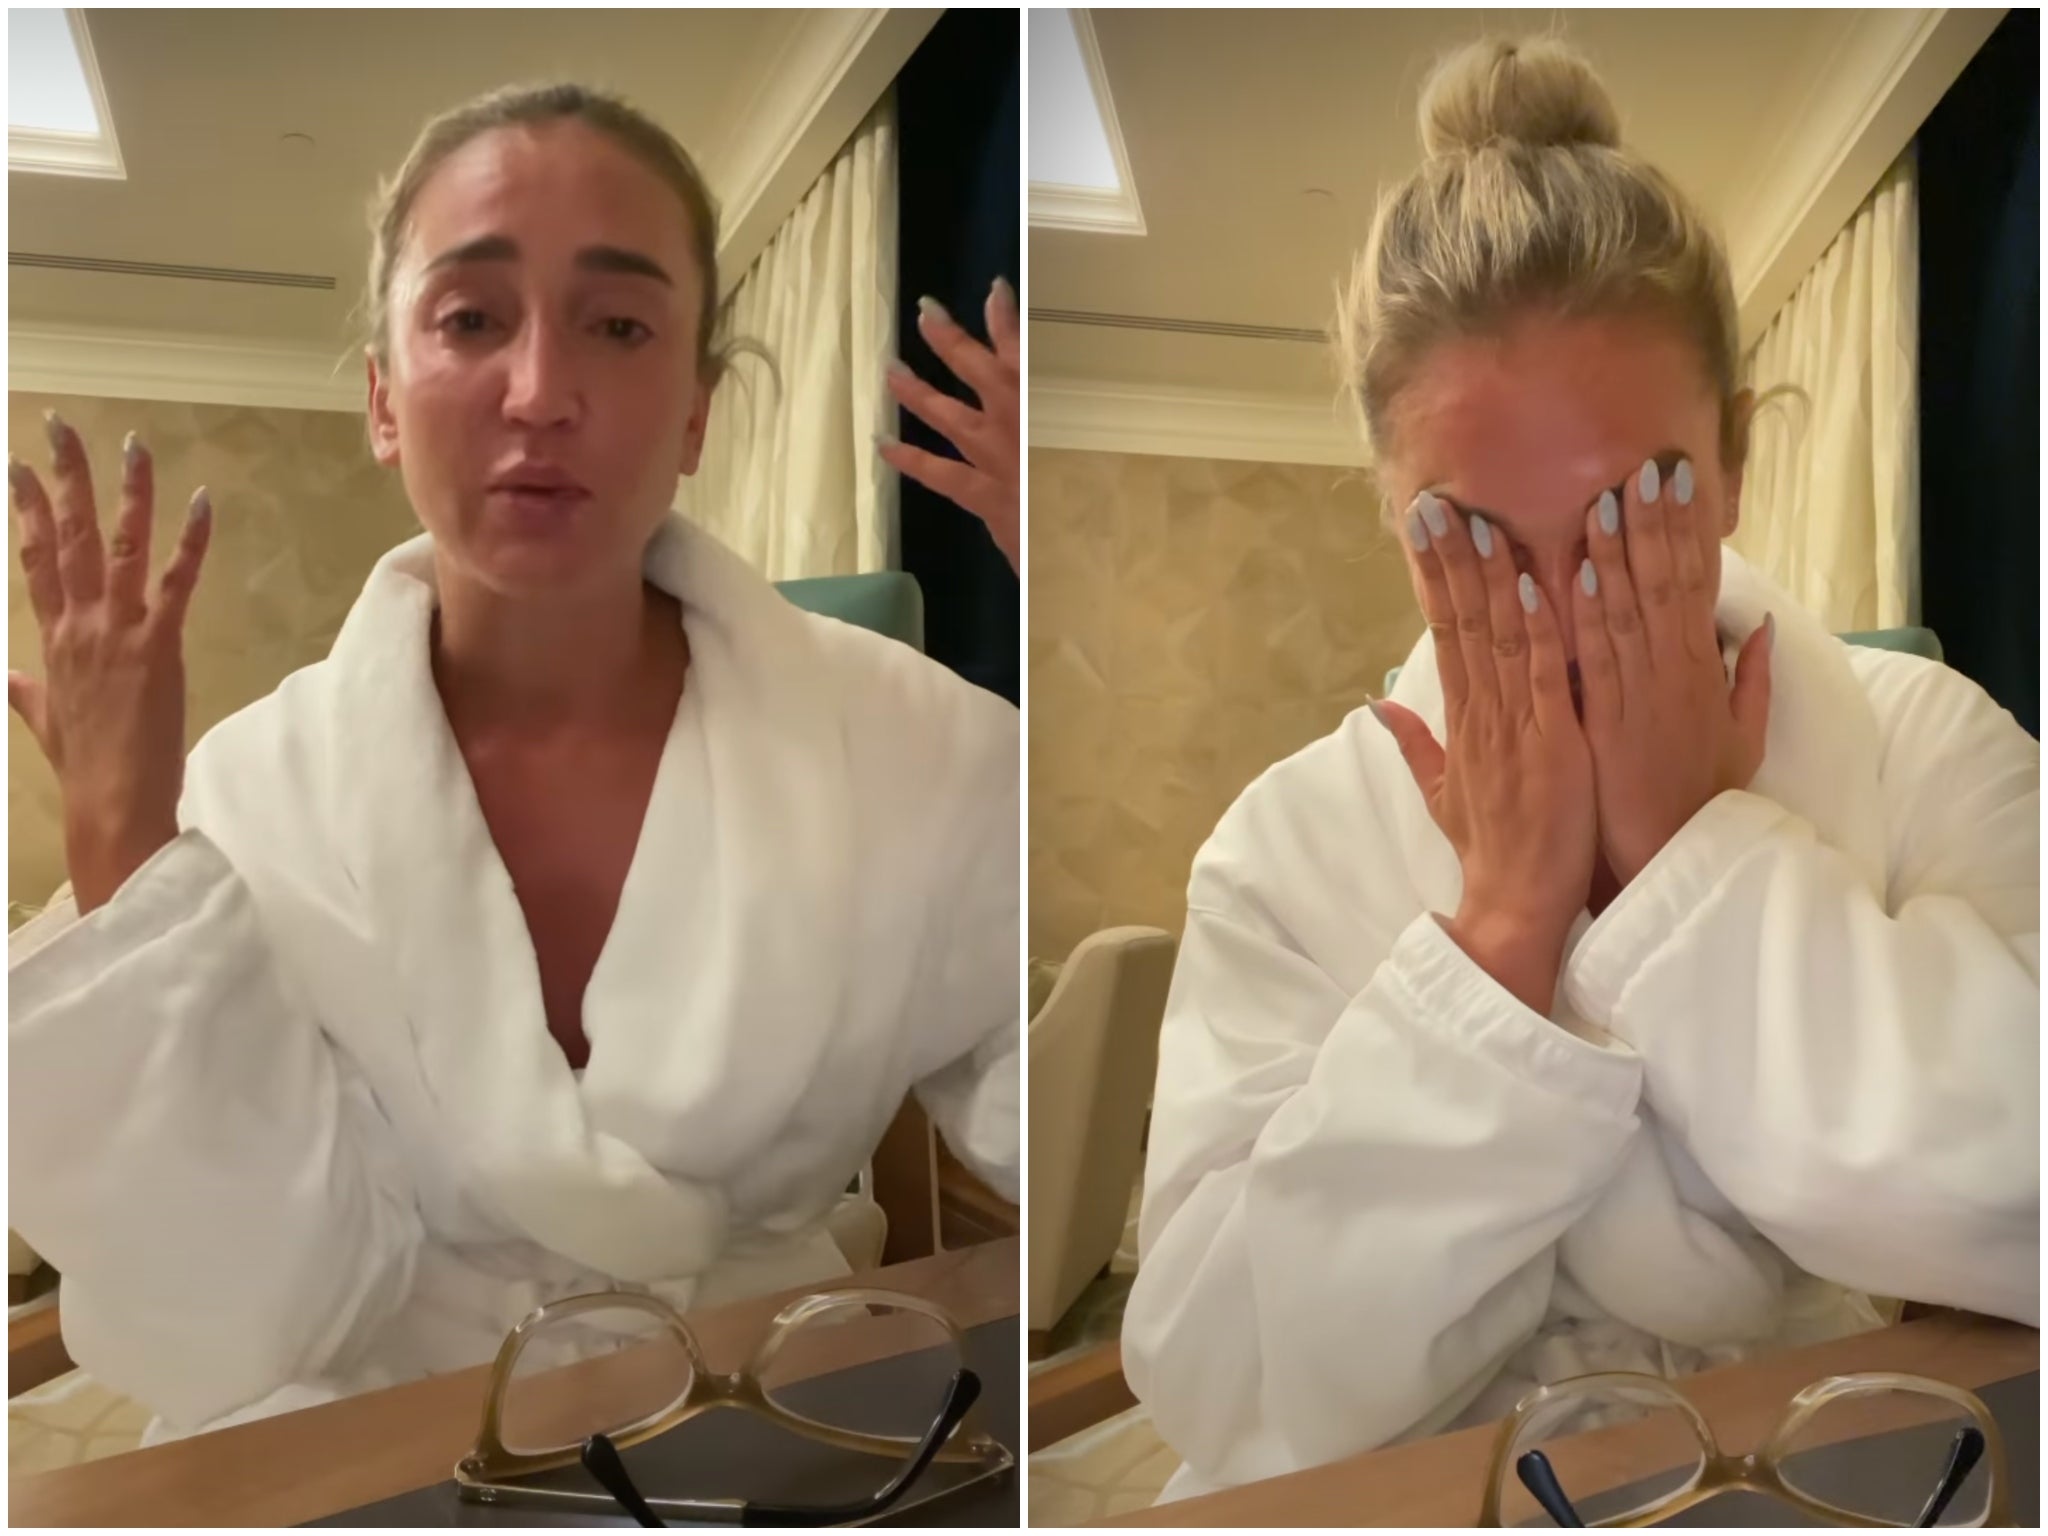 Russian influencer, Olga Buzova, posted a video on her Instagram account saying goodbye to her 23.3 million followers after Russia blocked the platform